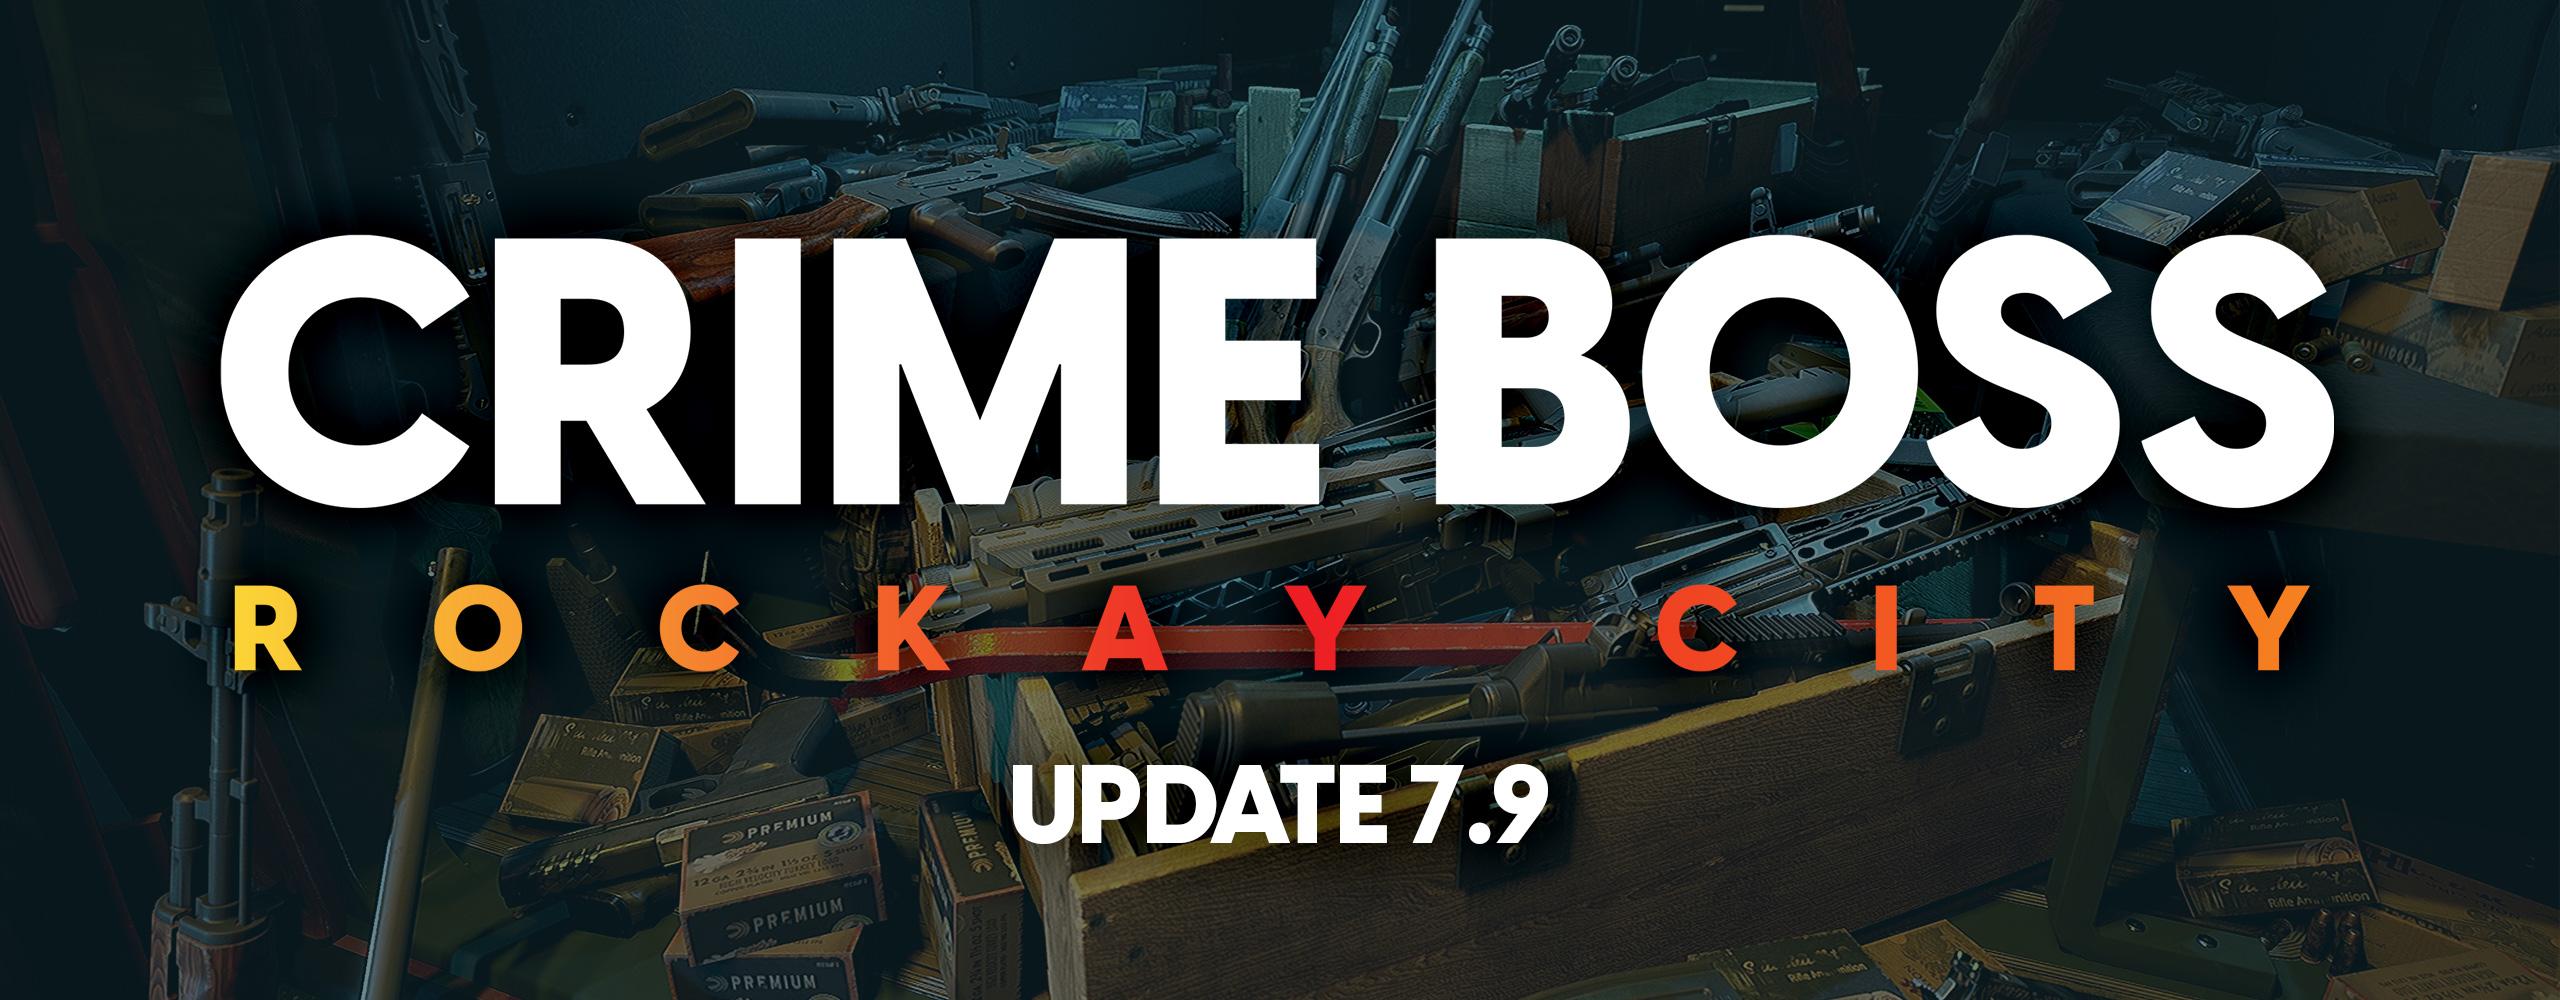 Update 7.9 has landed! – Crime Boss Update 7.9 OUT NOW on Epic, Xbox Series X|S & PlayStation 5